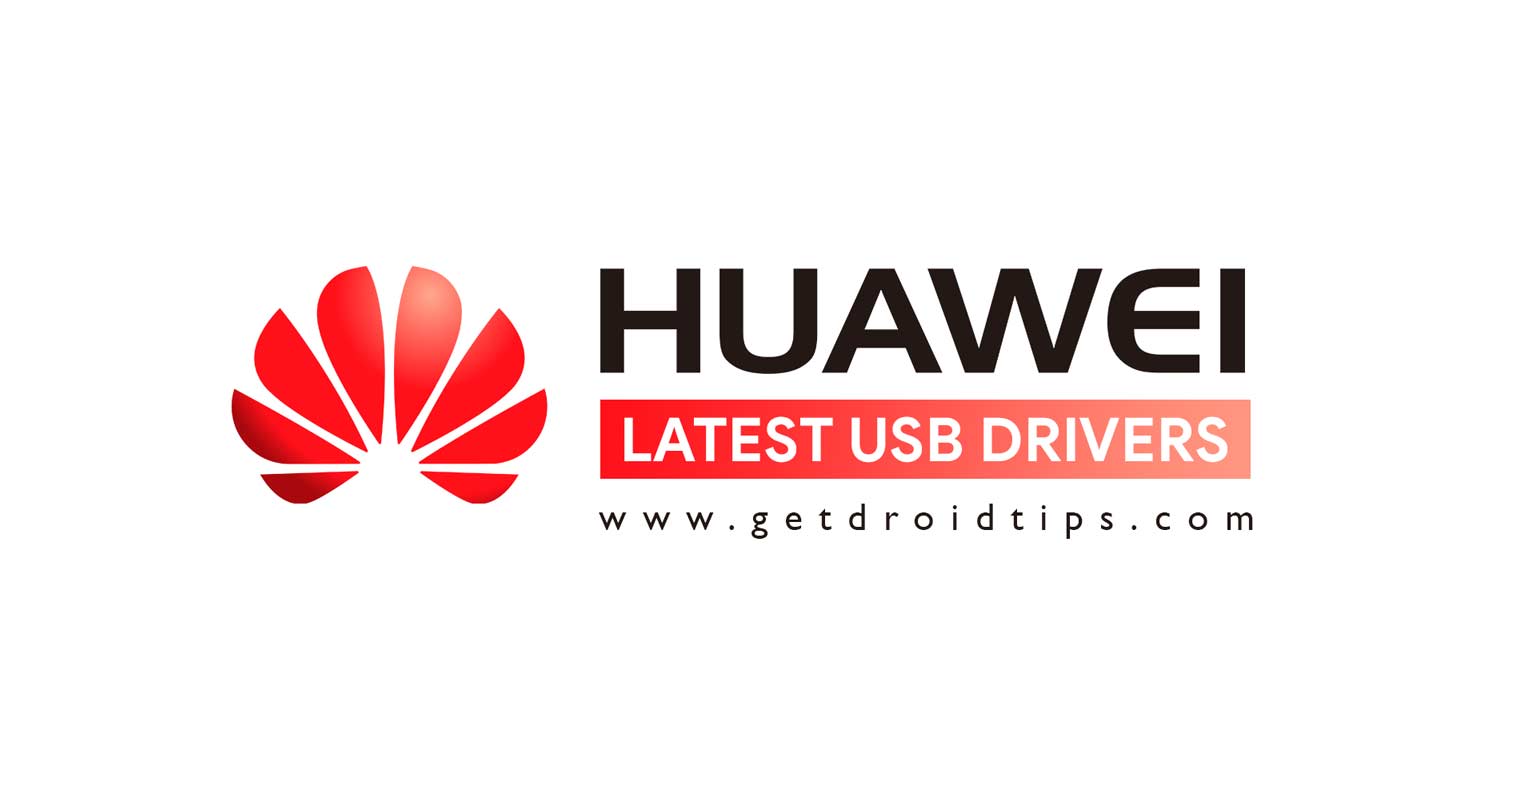 Huawei port devices driver win 7